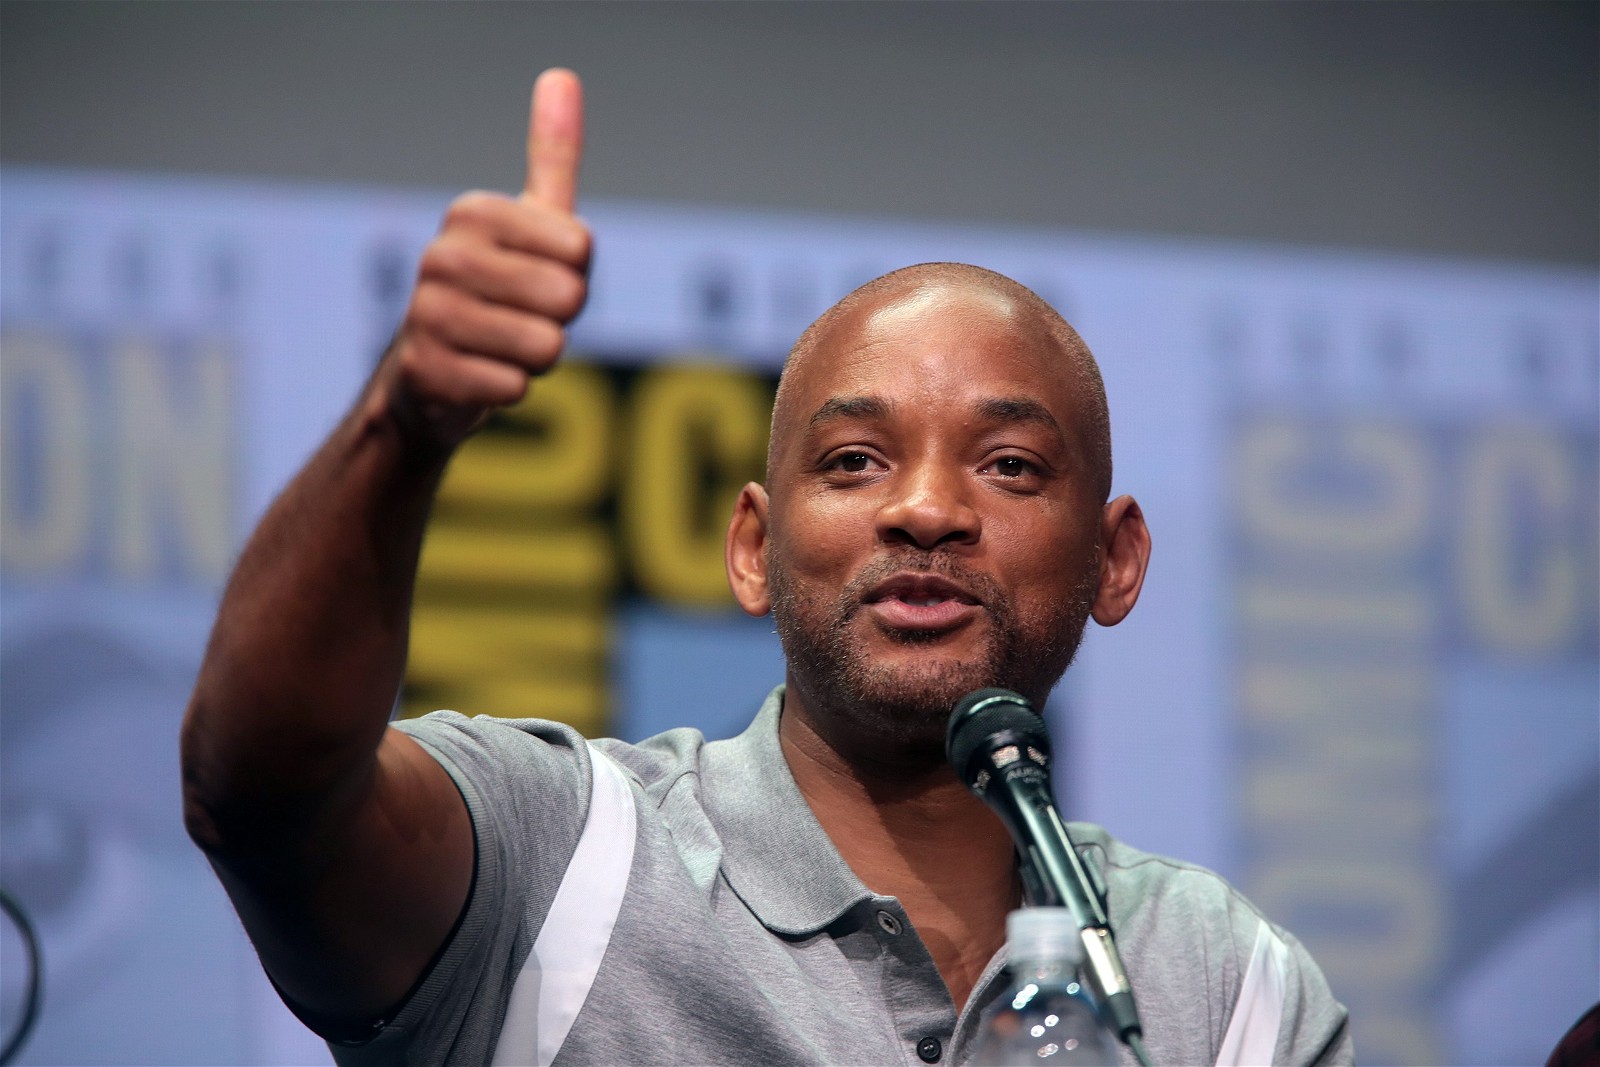 Will Smith speaking to the audience at the 2017 San Diego Comic Con International